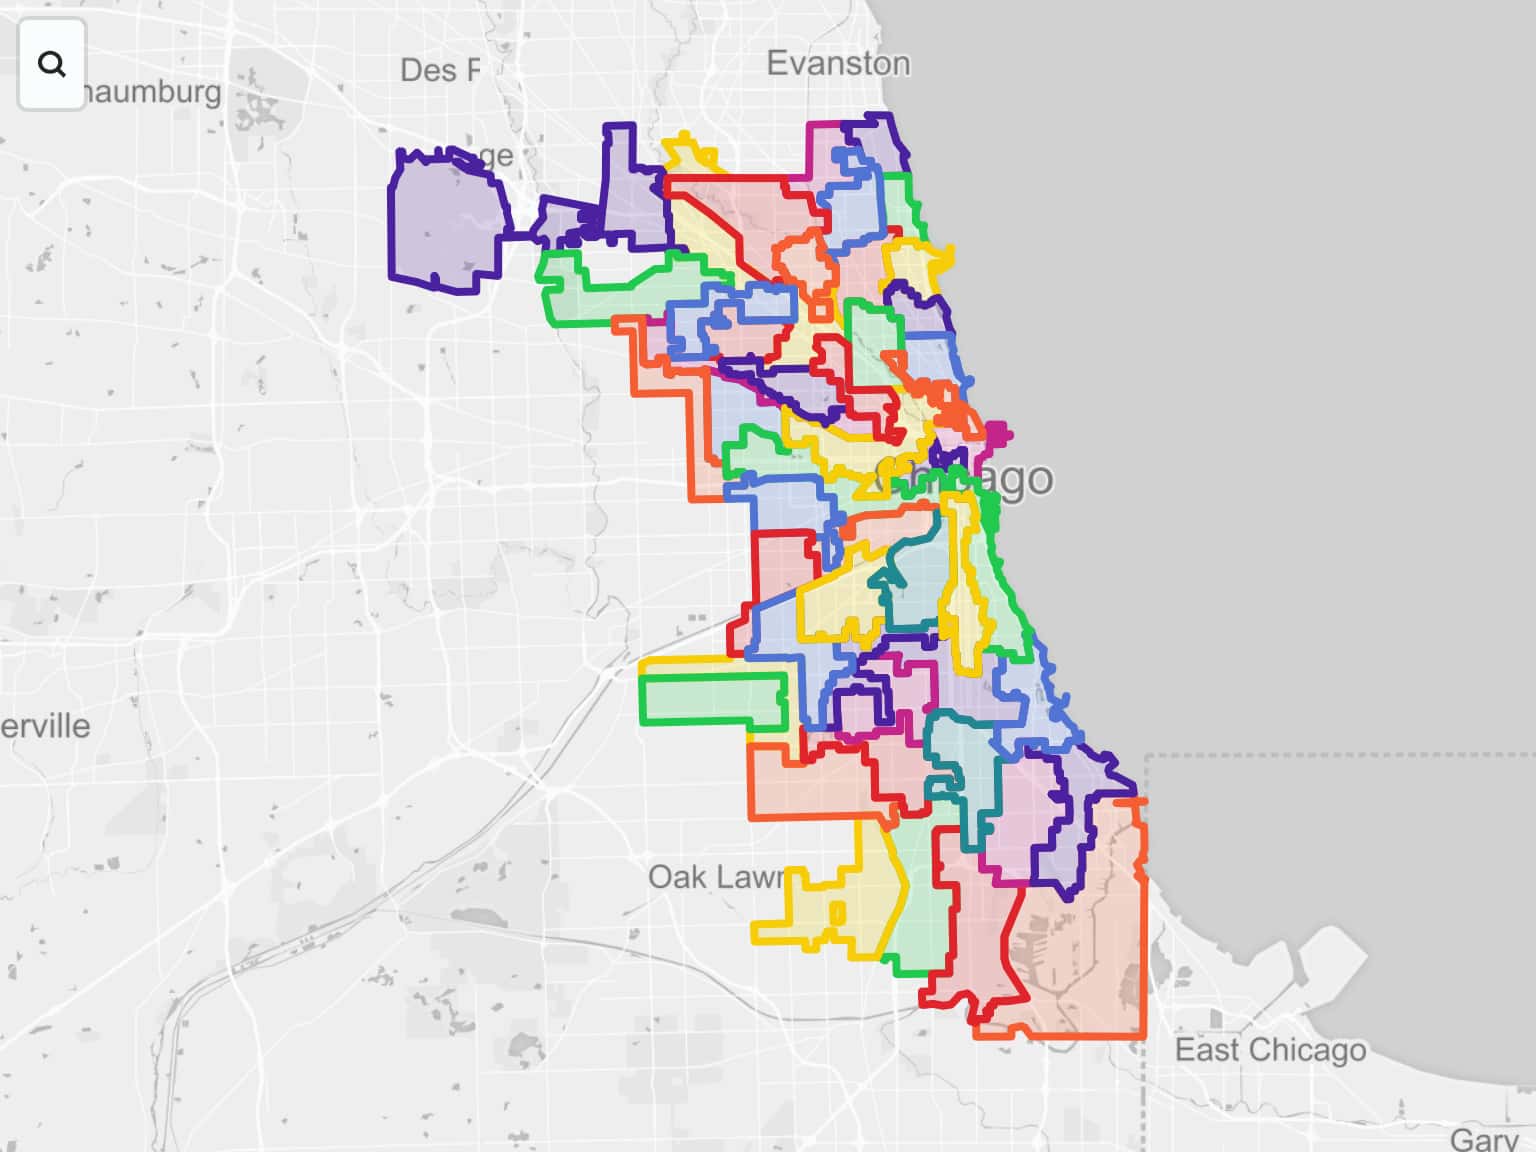 Chicago Wards By Kbauer · Maphub 3135